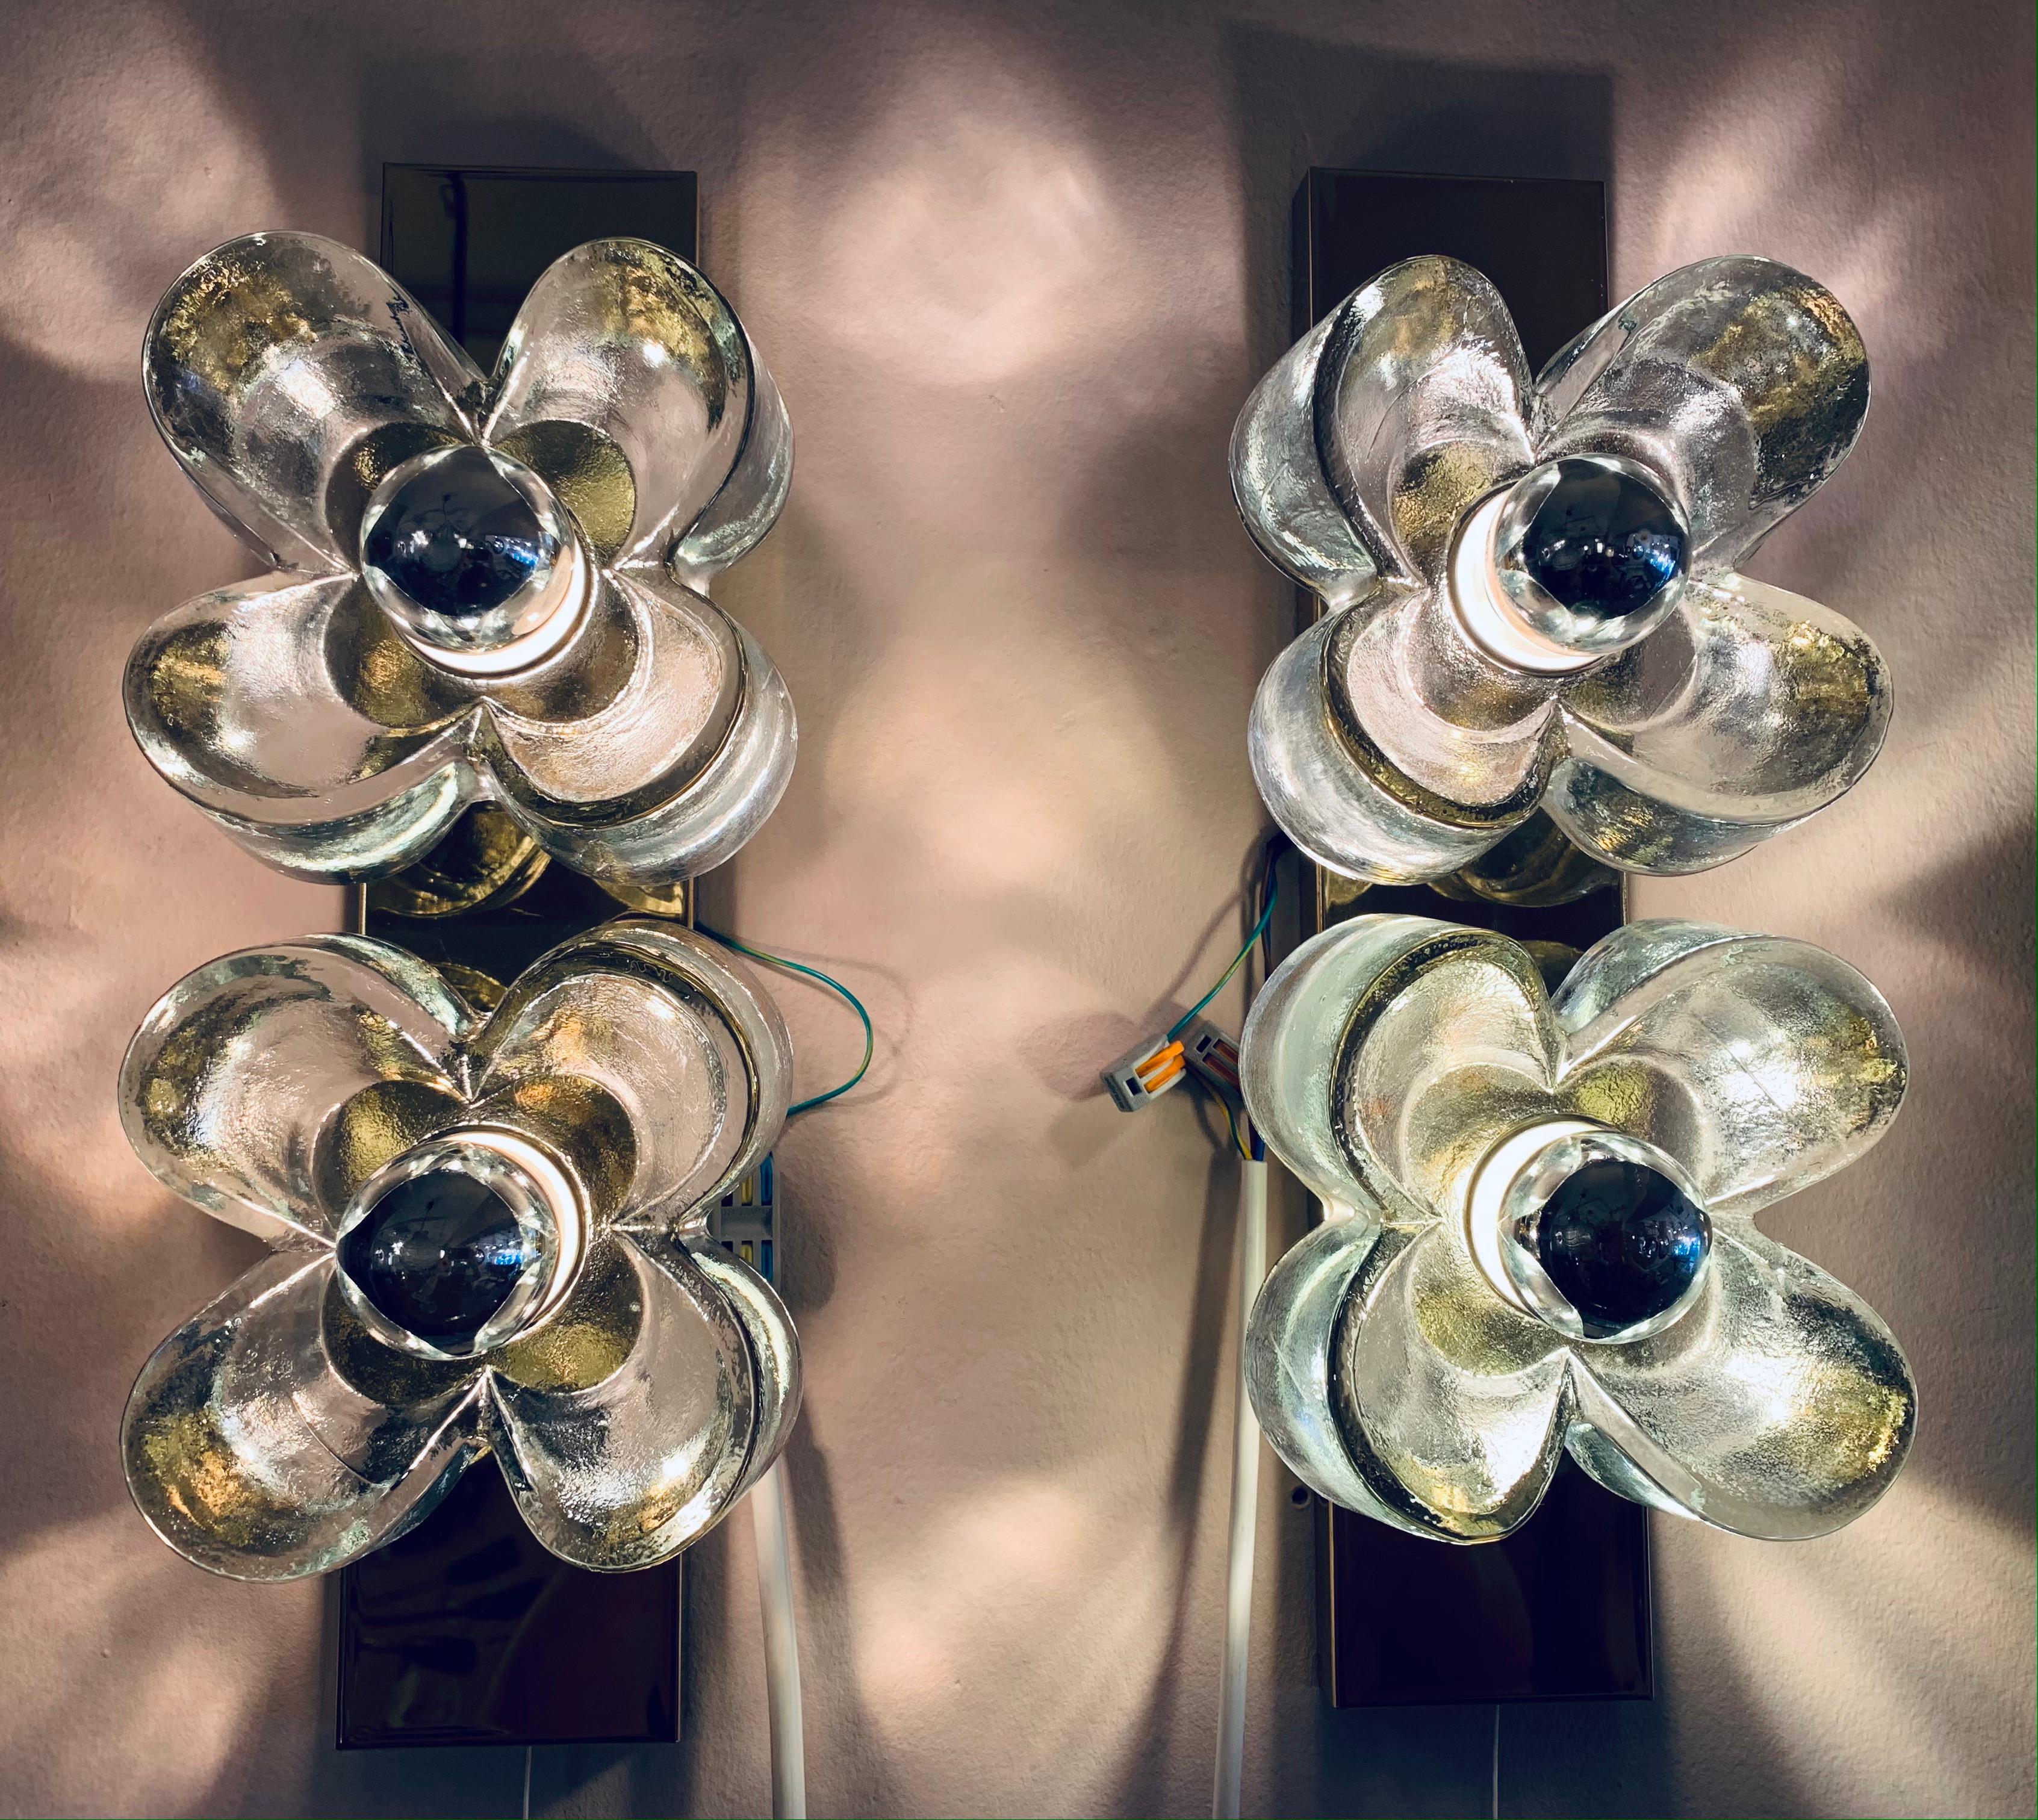 A striking and unusual pair of flower wall sconces or wall lights designed by Simon and Schelle for Sische Lighting during the 1970s in Germany. The two Murano glass four petal flowers are secured onto the brass base with screwable chrome rings. The